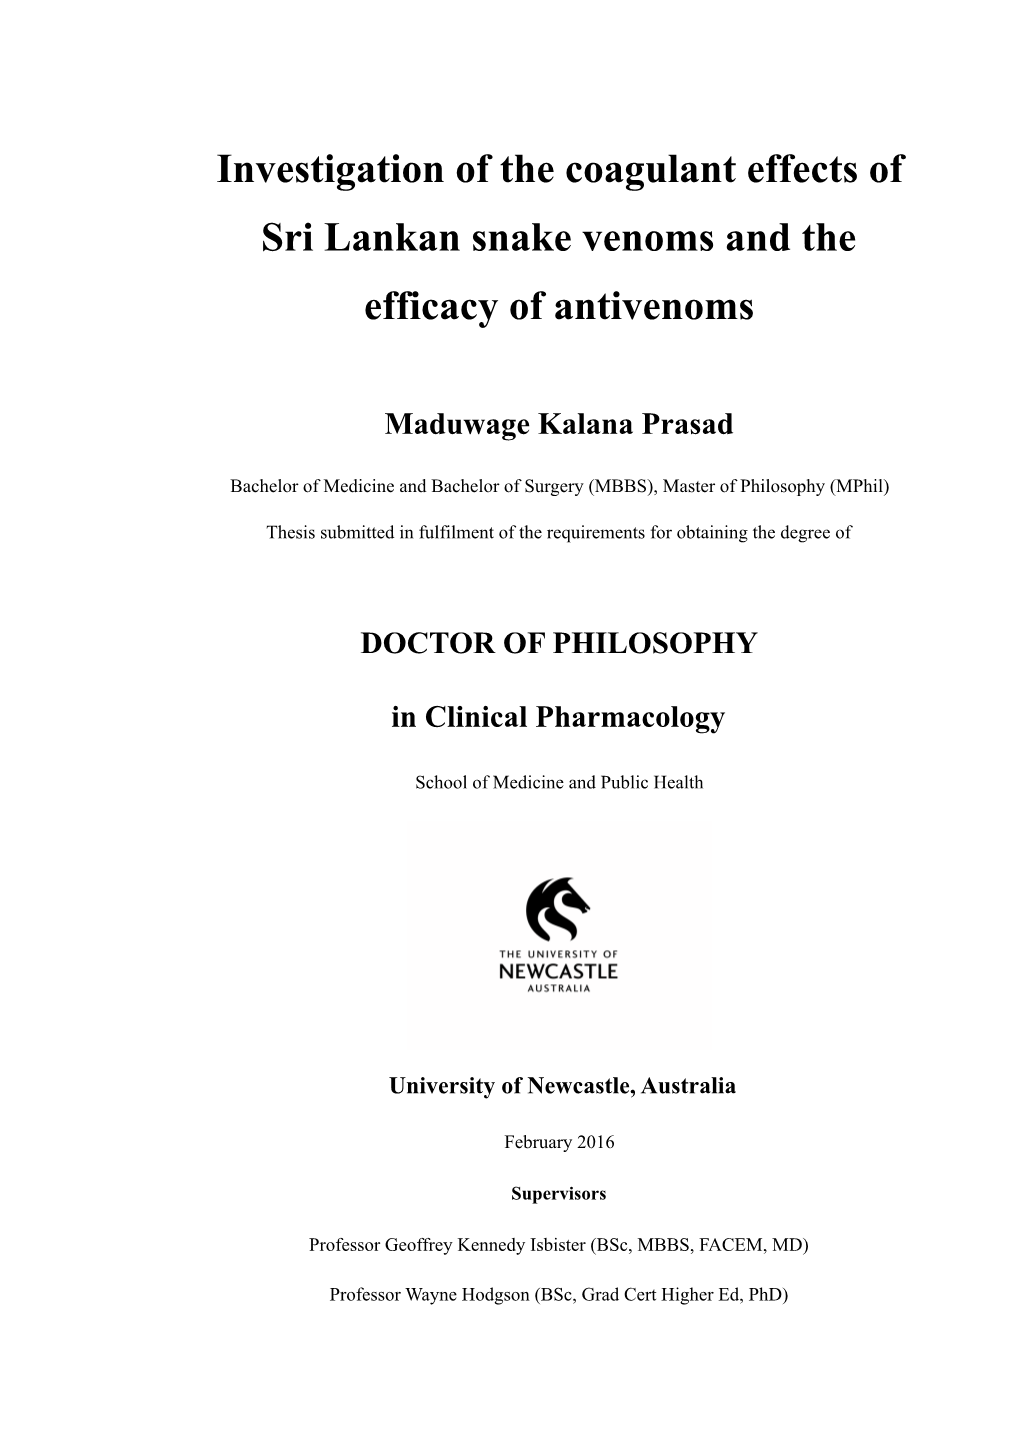 Investigation of the Coagulant Effects of Sri Lankan Snake Venoms and the Efficacy of Antivenoms